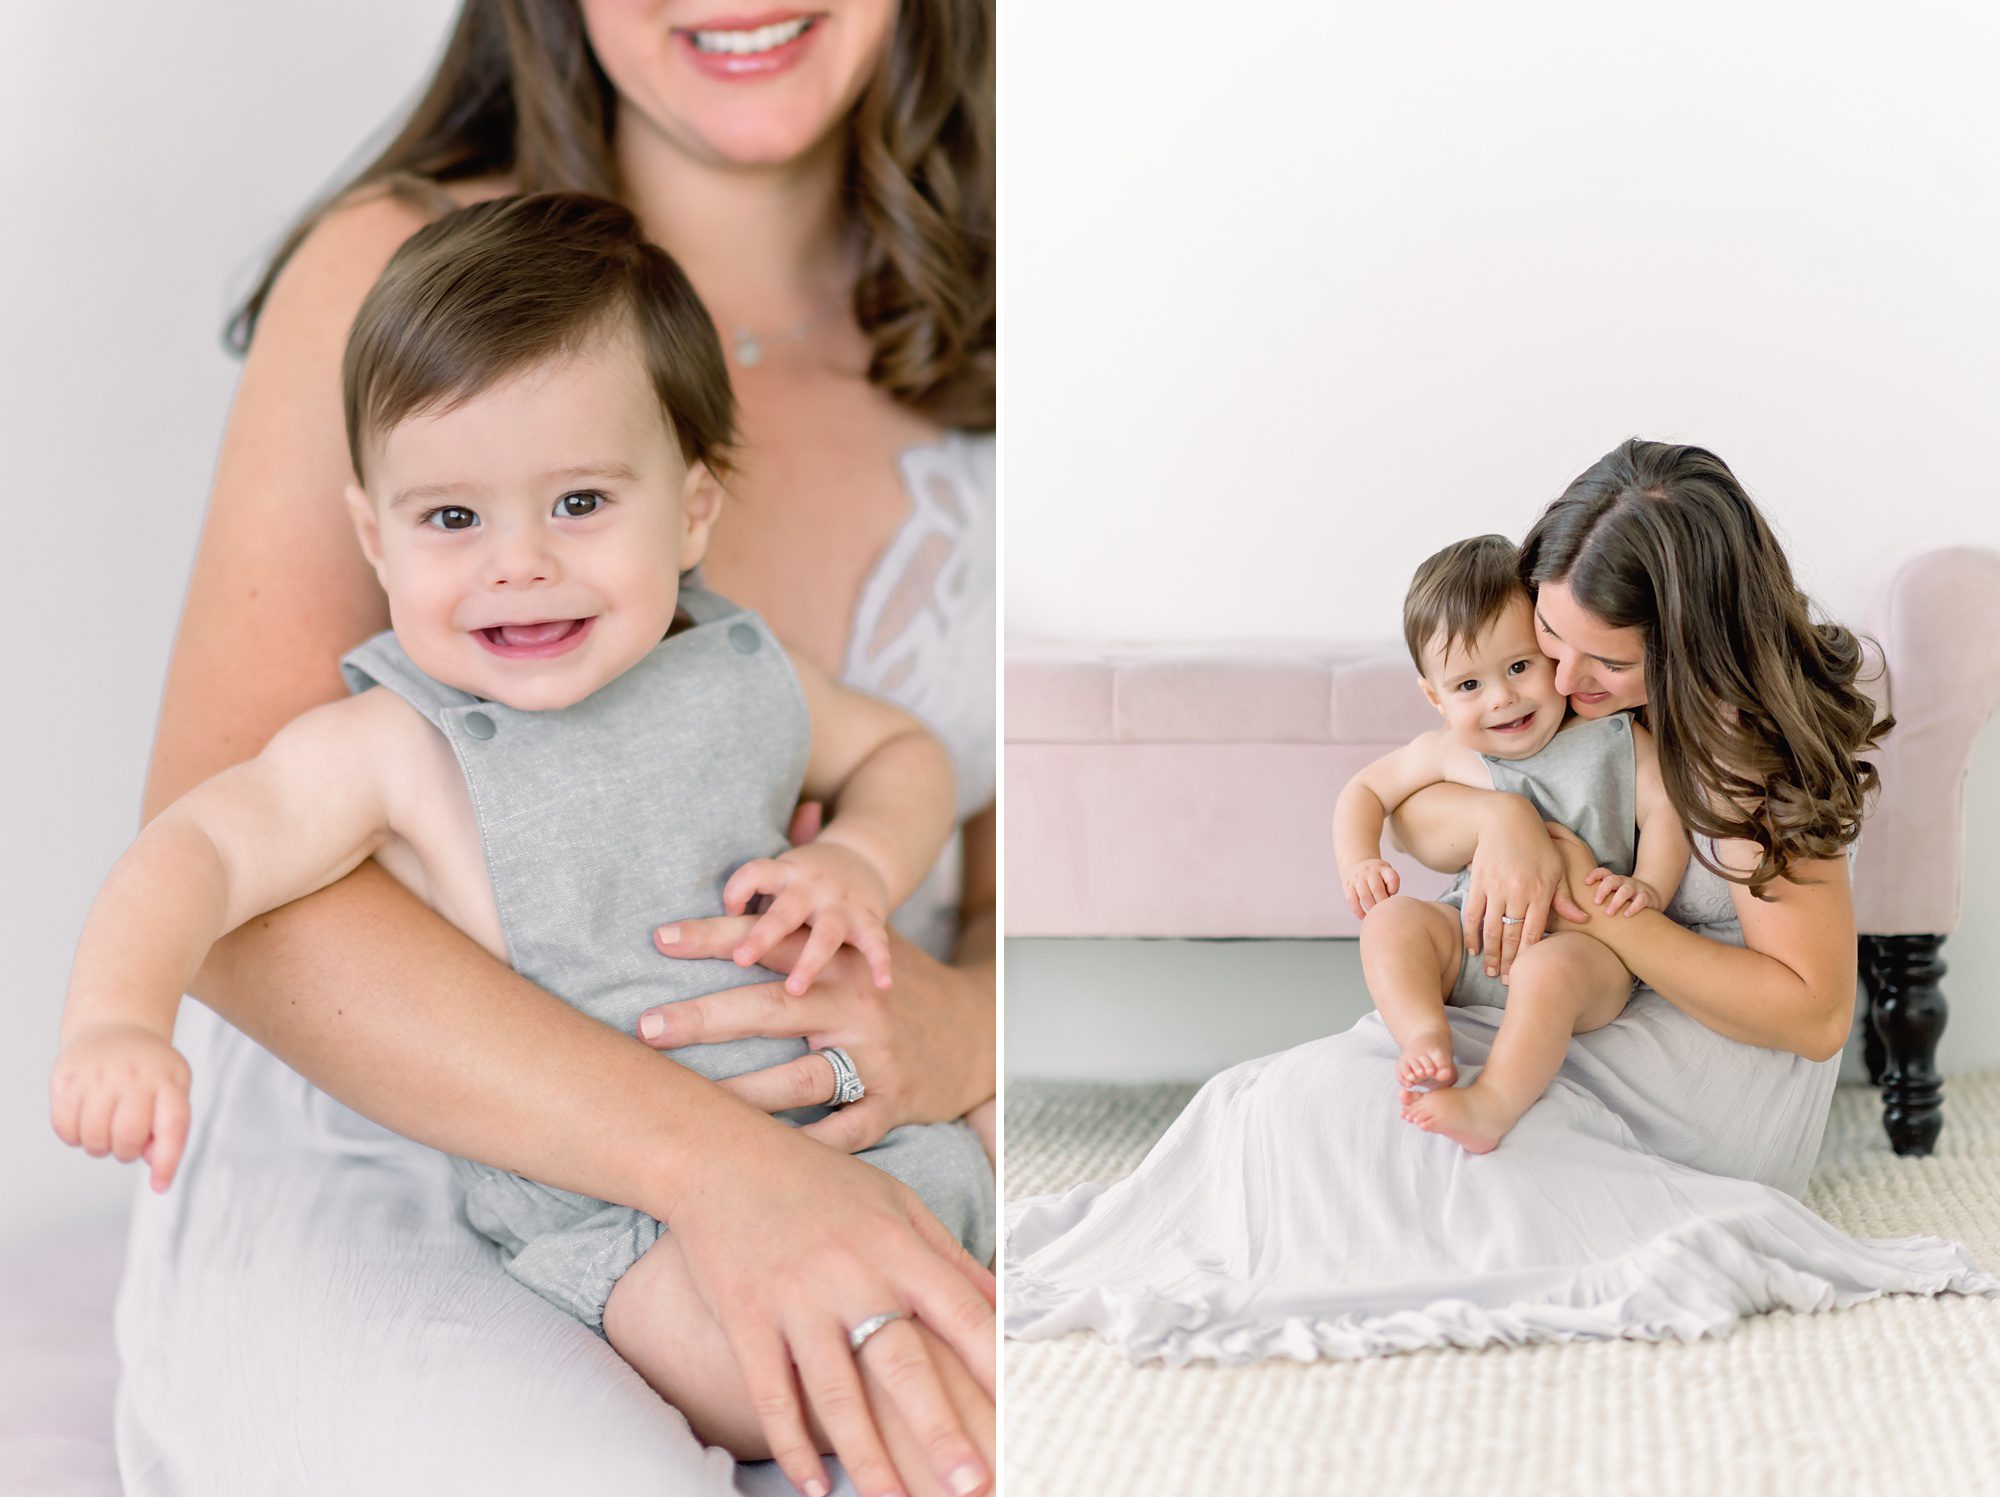 A beautiful young brunette mom gets timeless portraits done in a white studio with her 10 month old son.